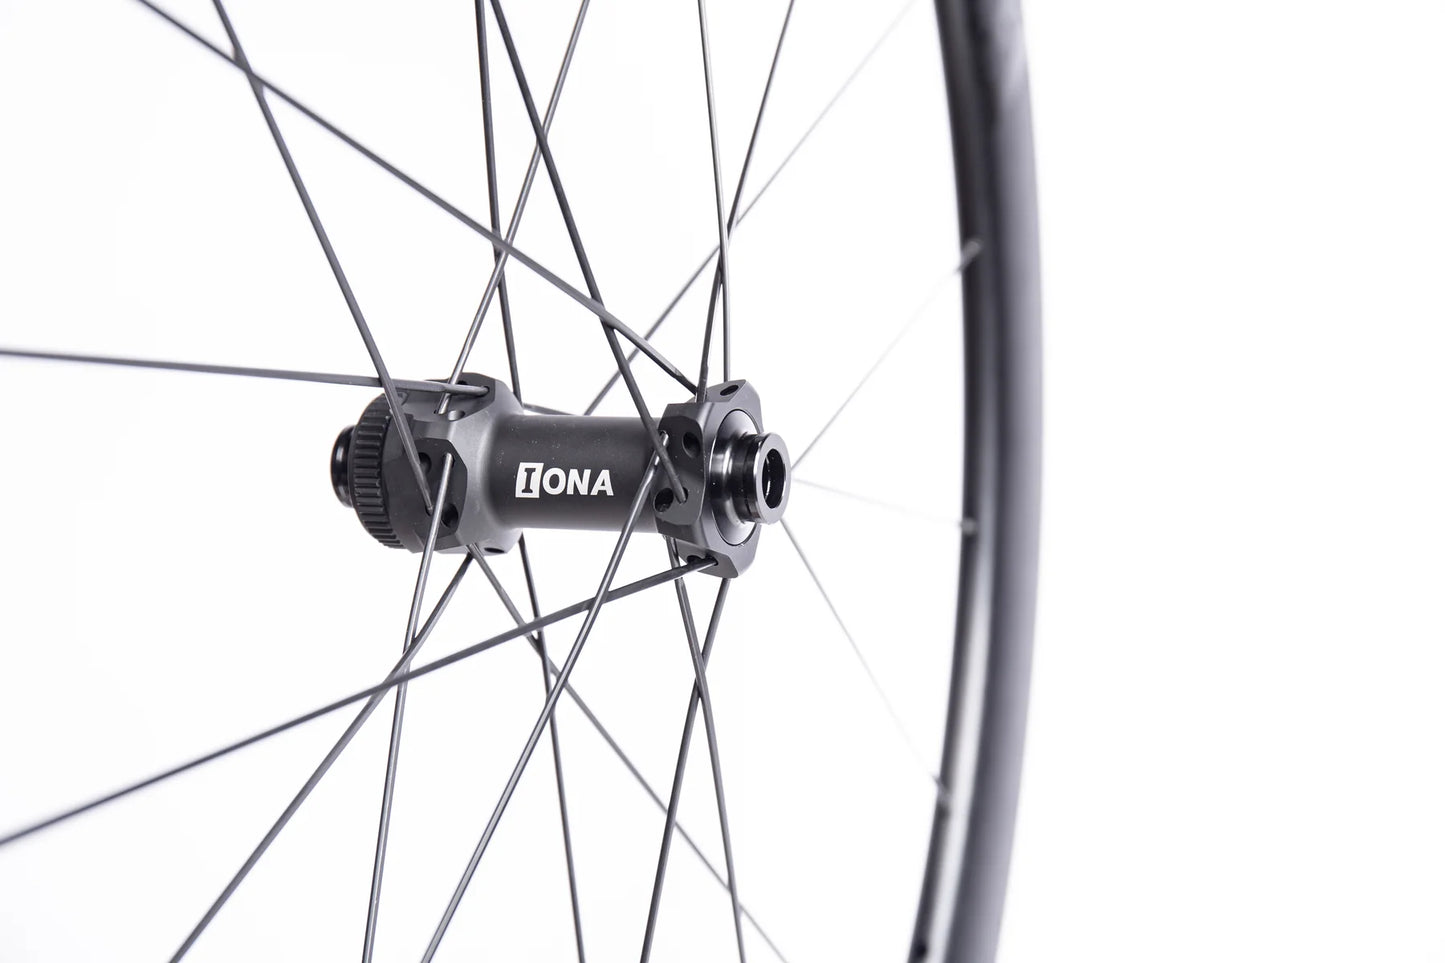 ERE Research Explorator GCR40 Disc Wheelset - XDR